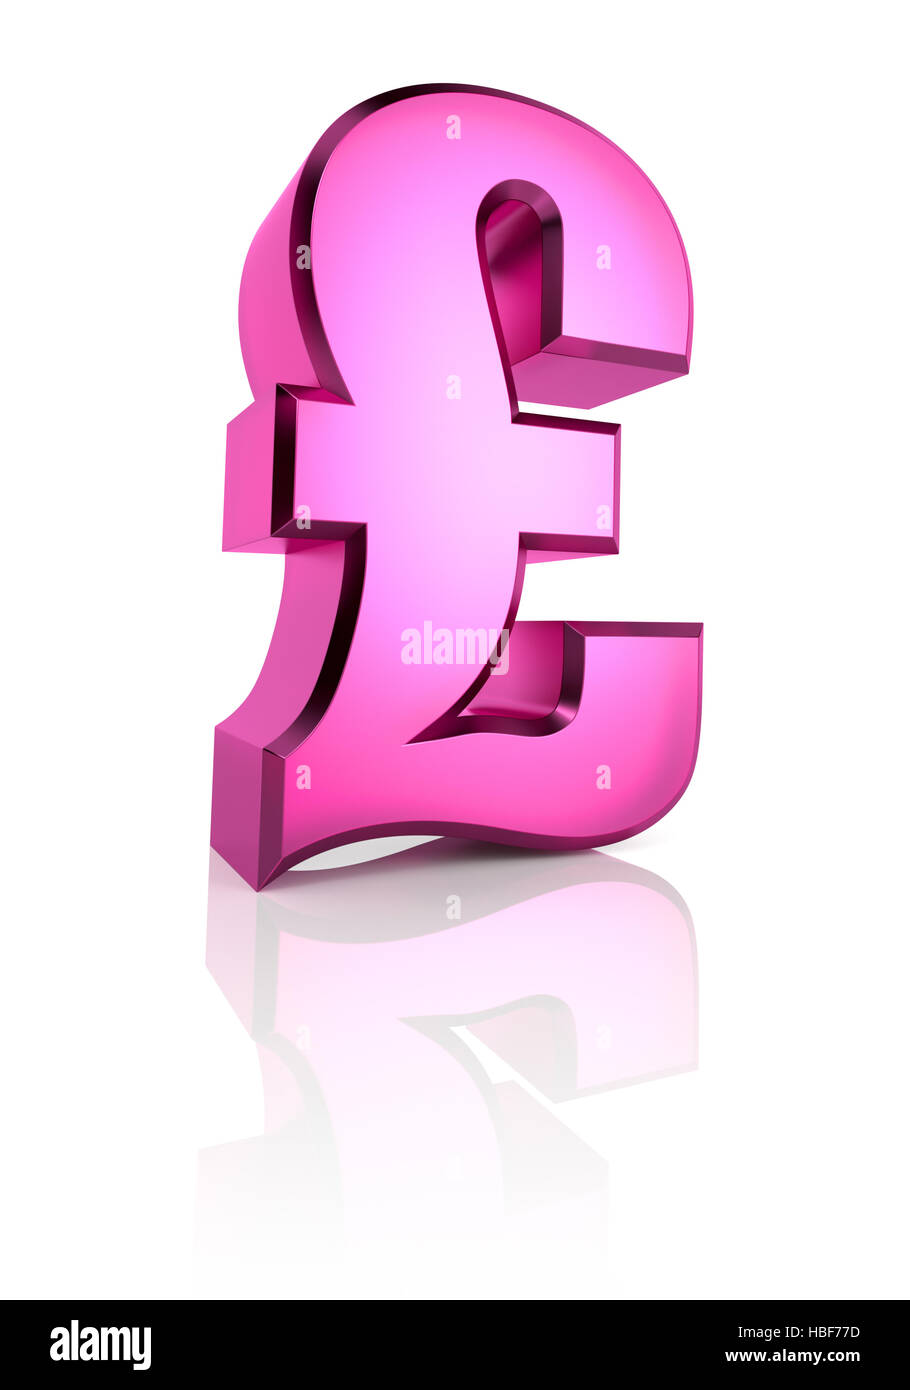 Pink Pound Currency Symbol Stock Photo